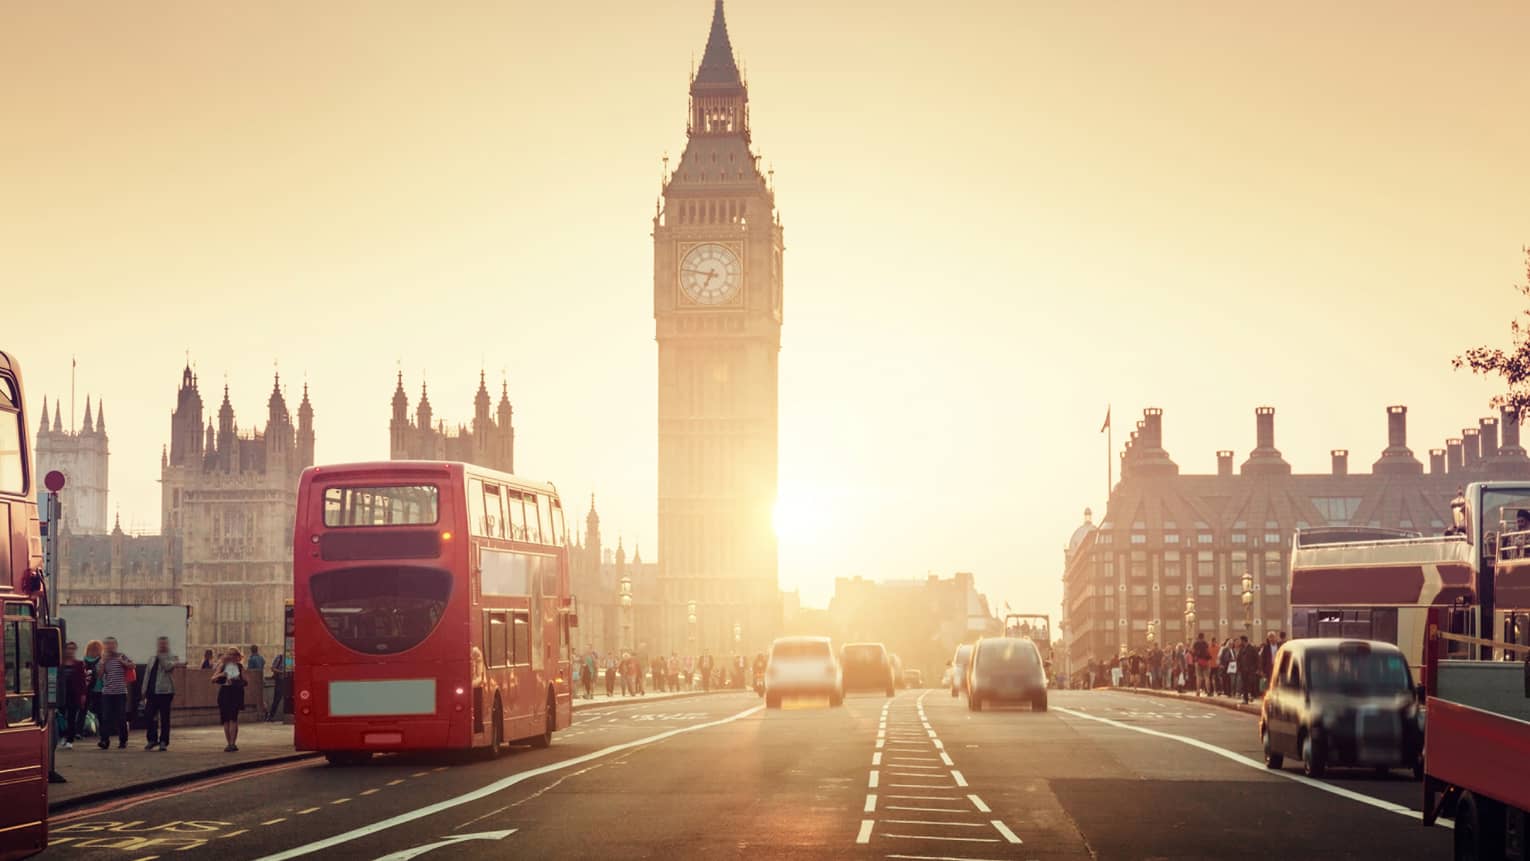 Street view of London at sunset, Big Ben tower and red double-decker bus in background